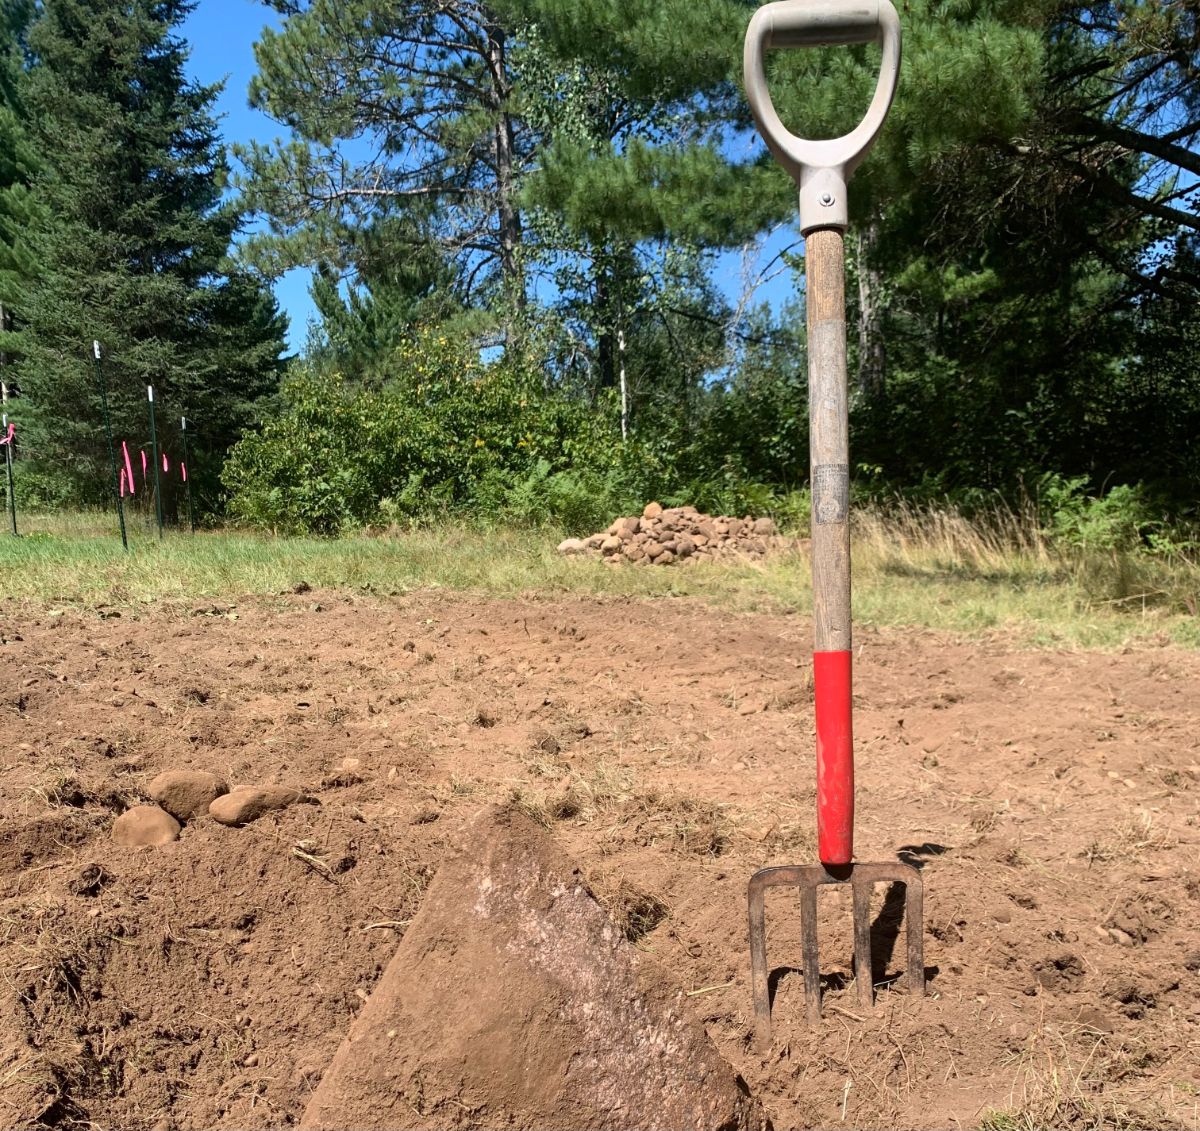 Pitch fork next to a large rock in a new garden bed